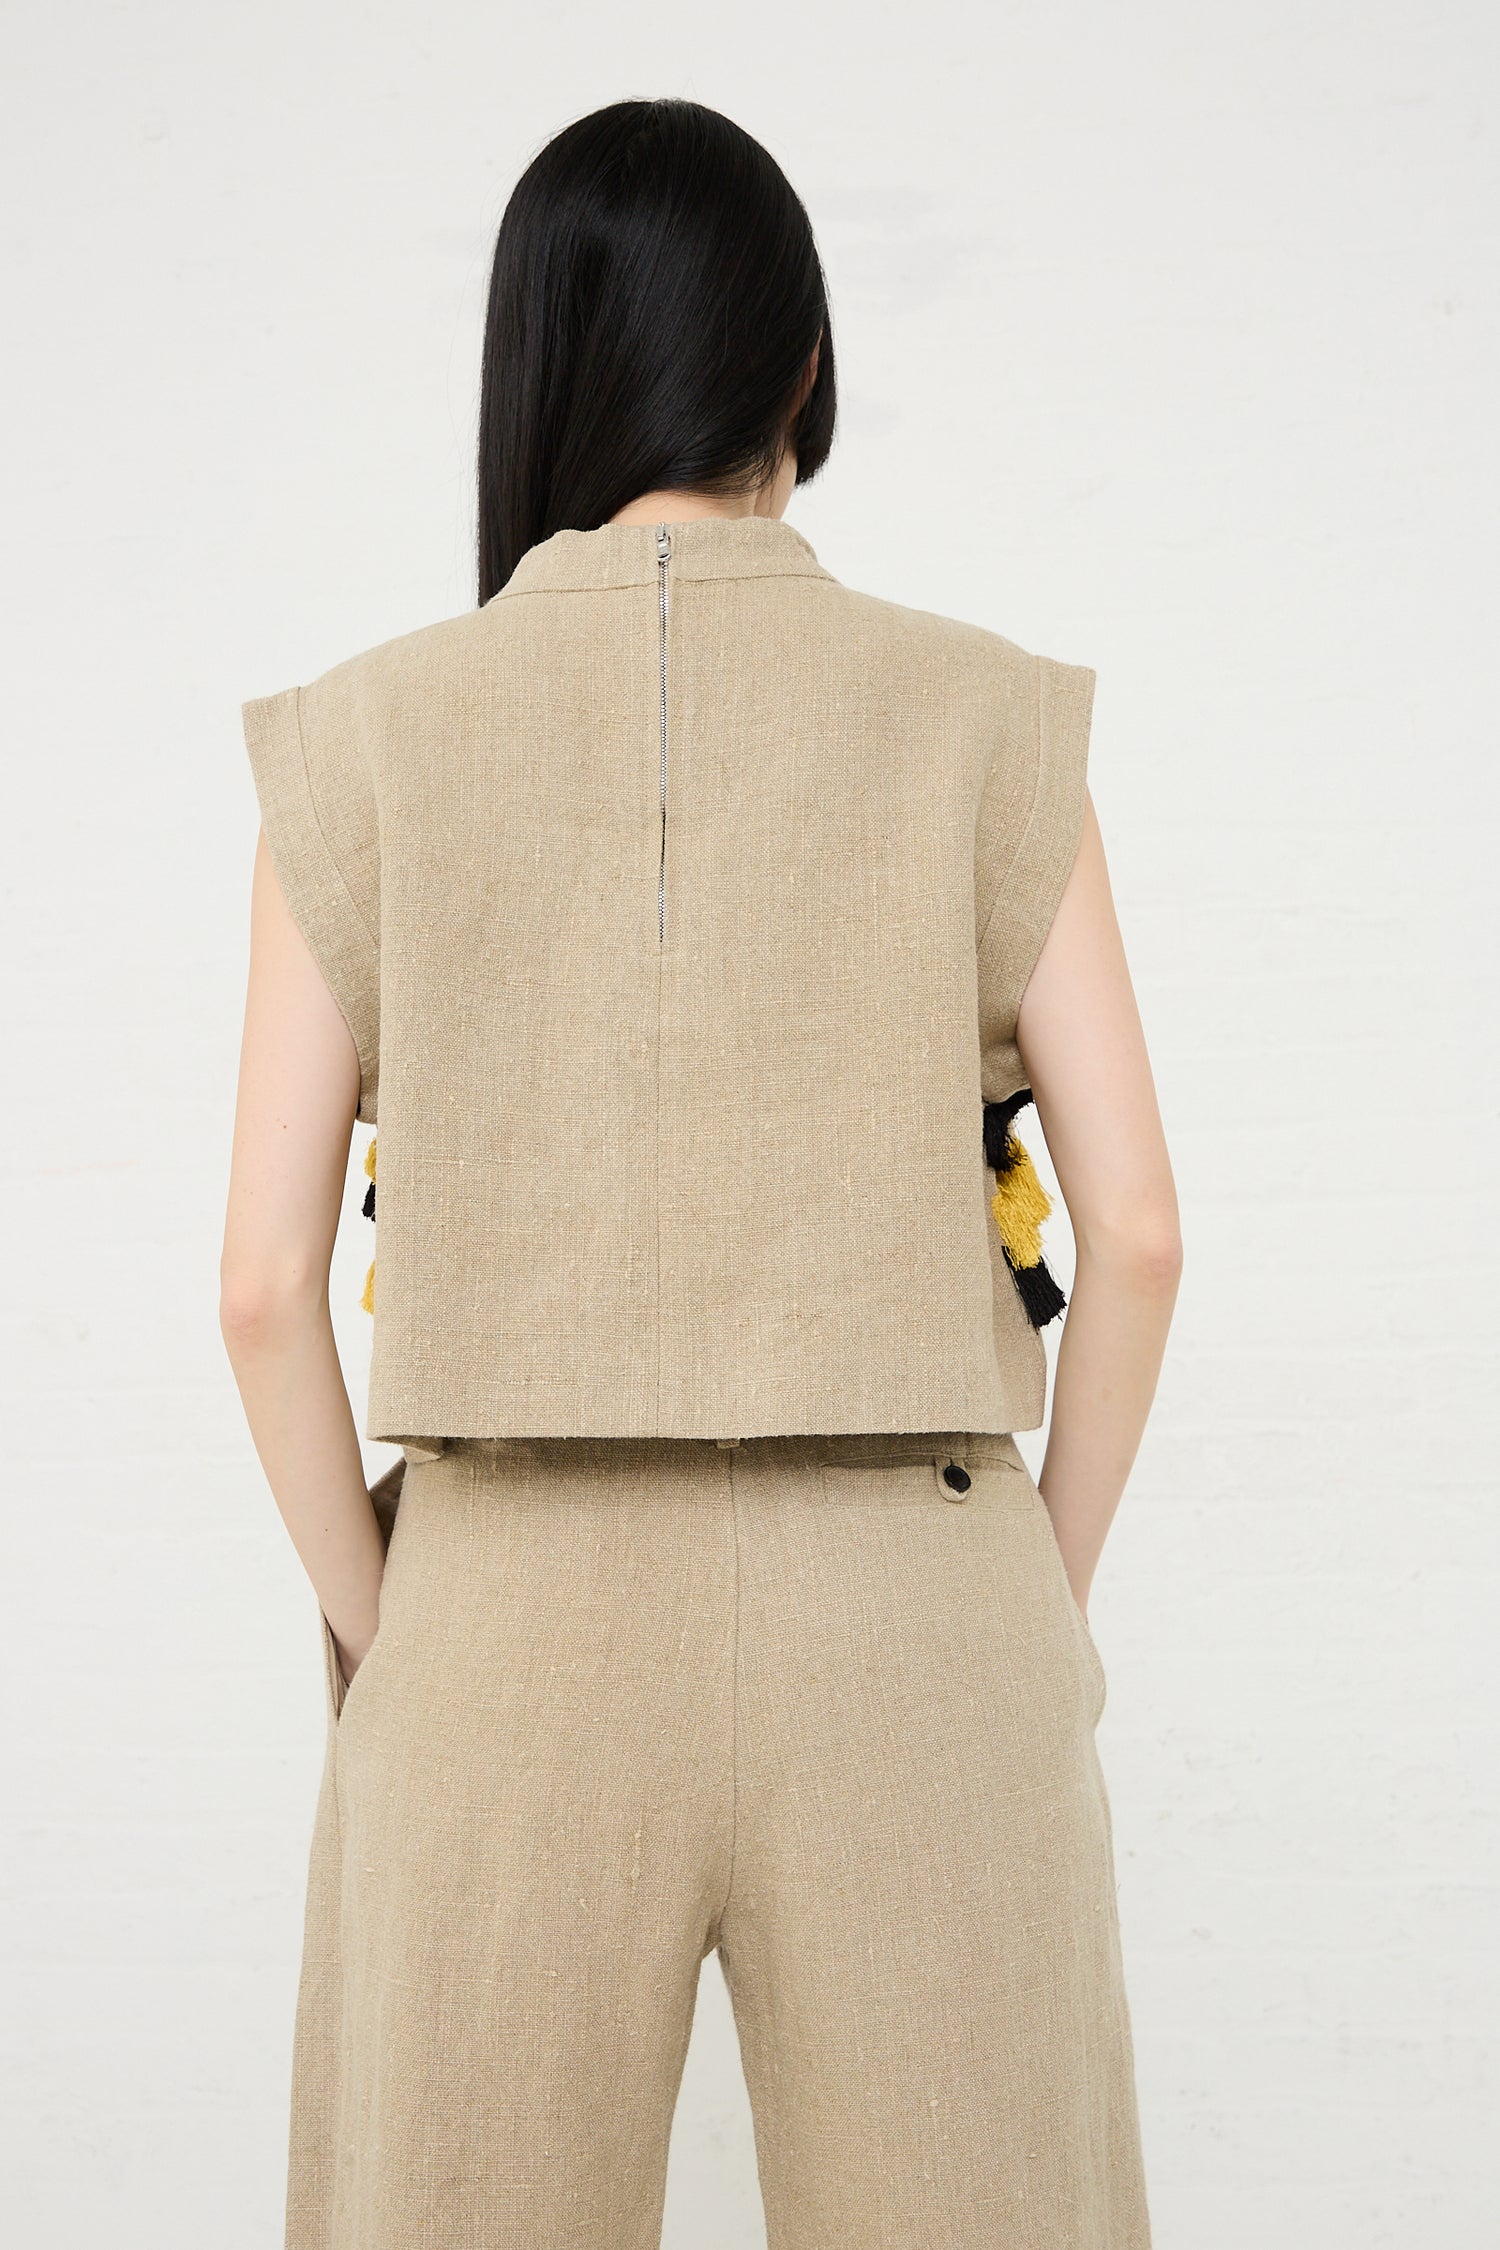 A woman seen from behind wearing a Rachel Comey Bacchus Top in Natural linen sleeveless crop top and matching trousers with abstract embroidery visible on the sides.